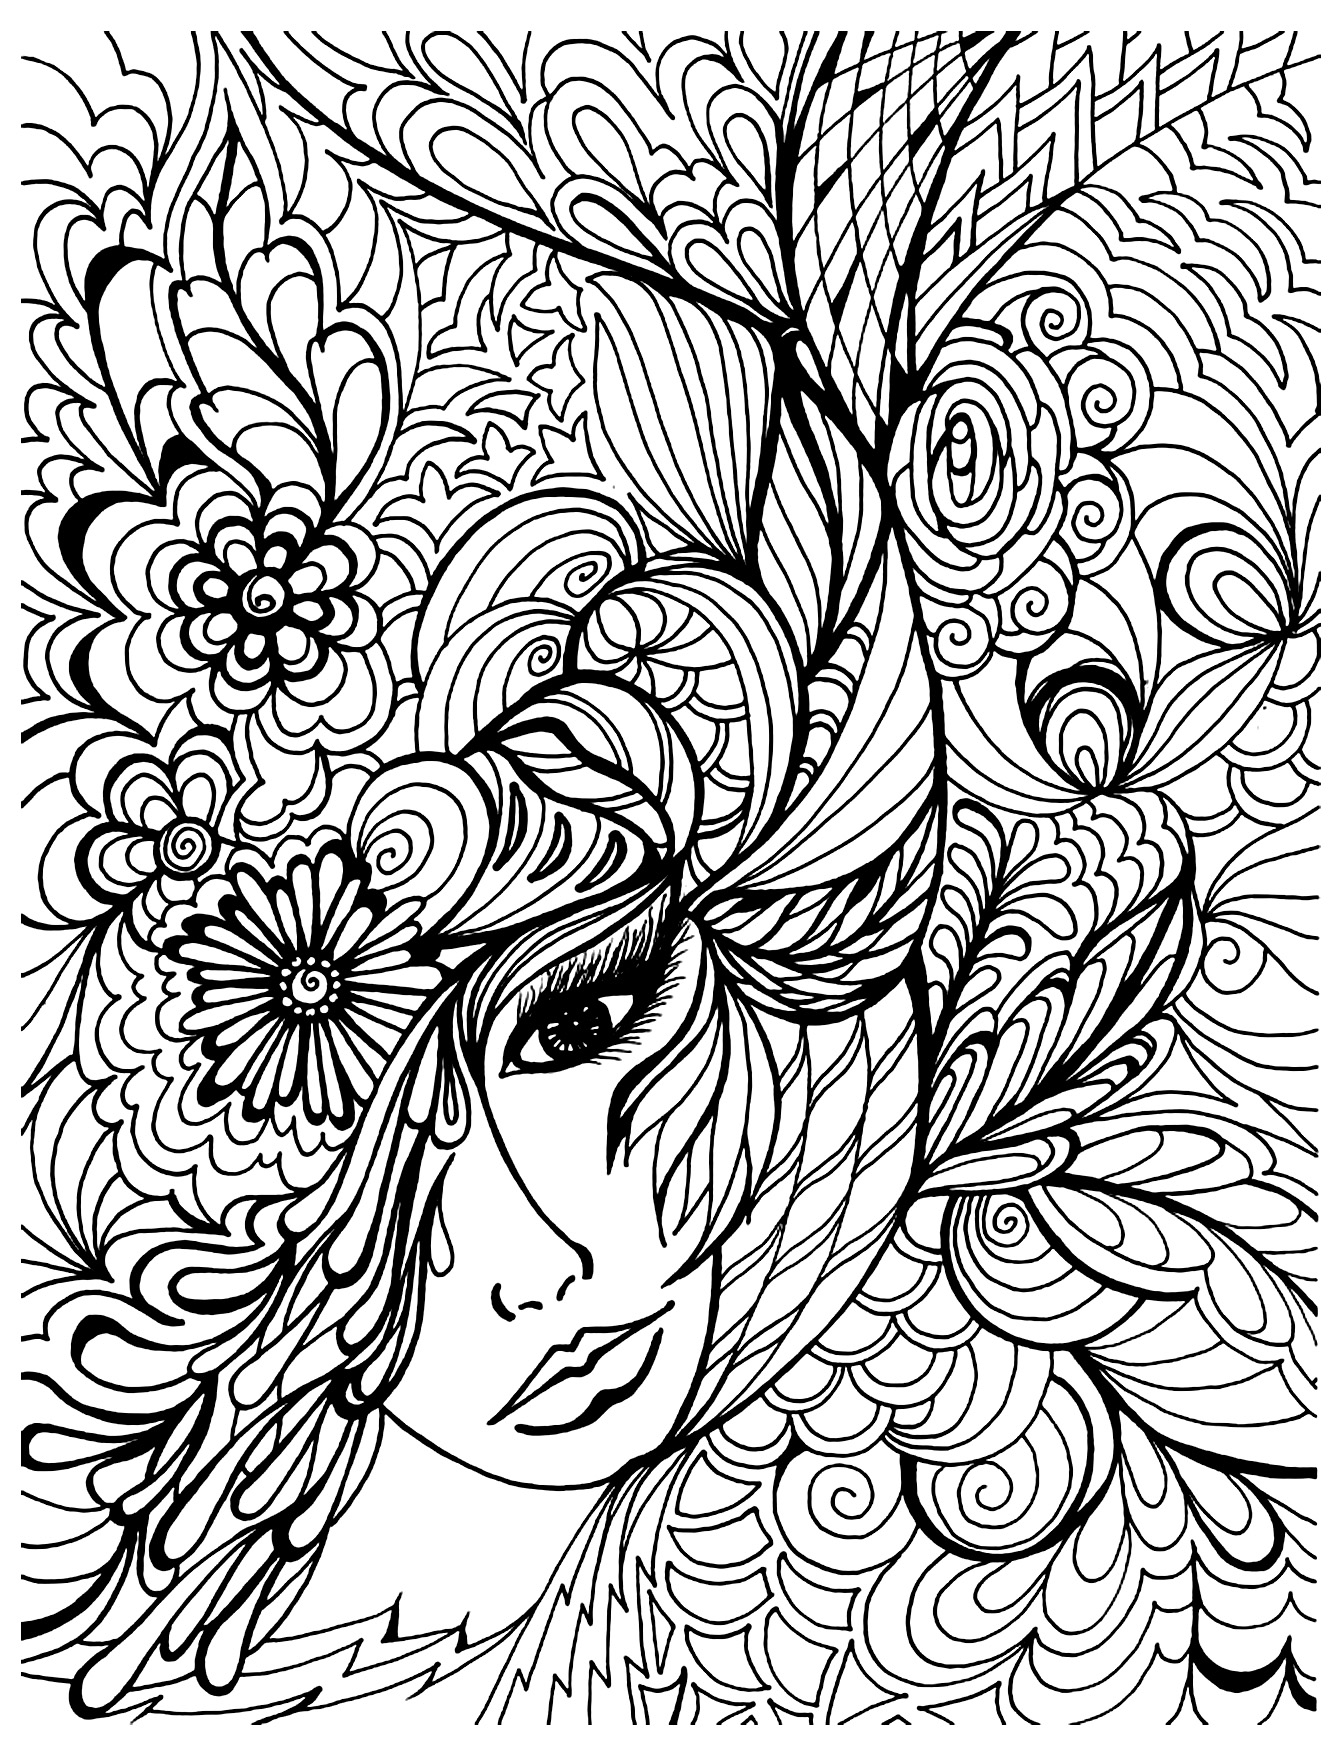 265 Cute Stress Coloring Pages 